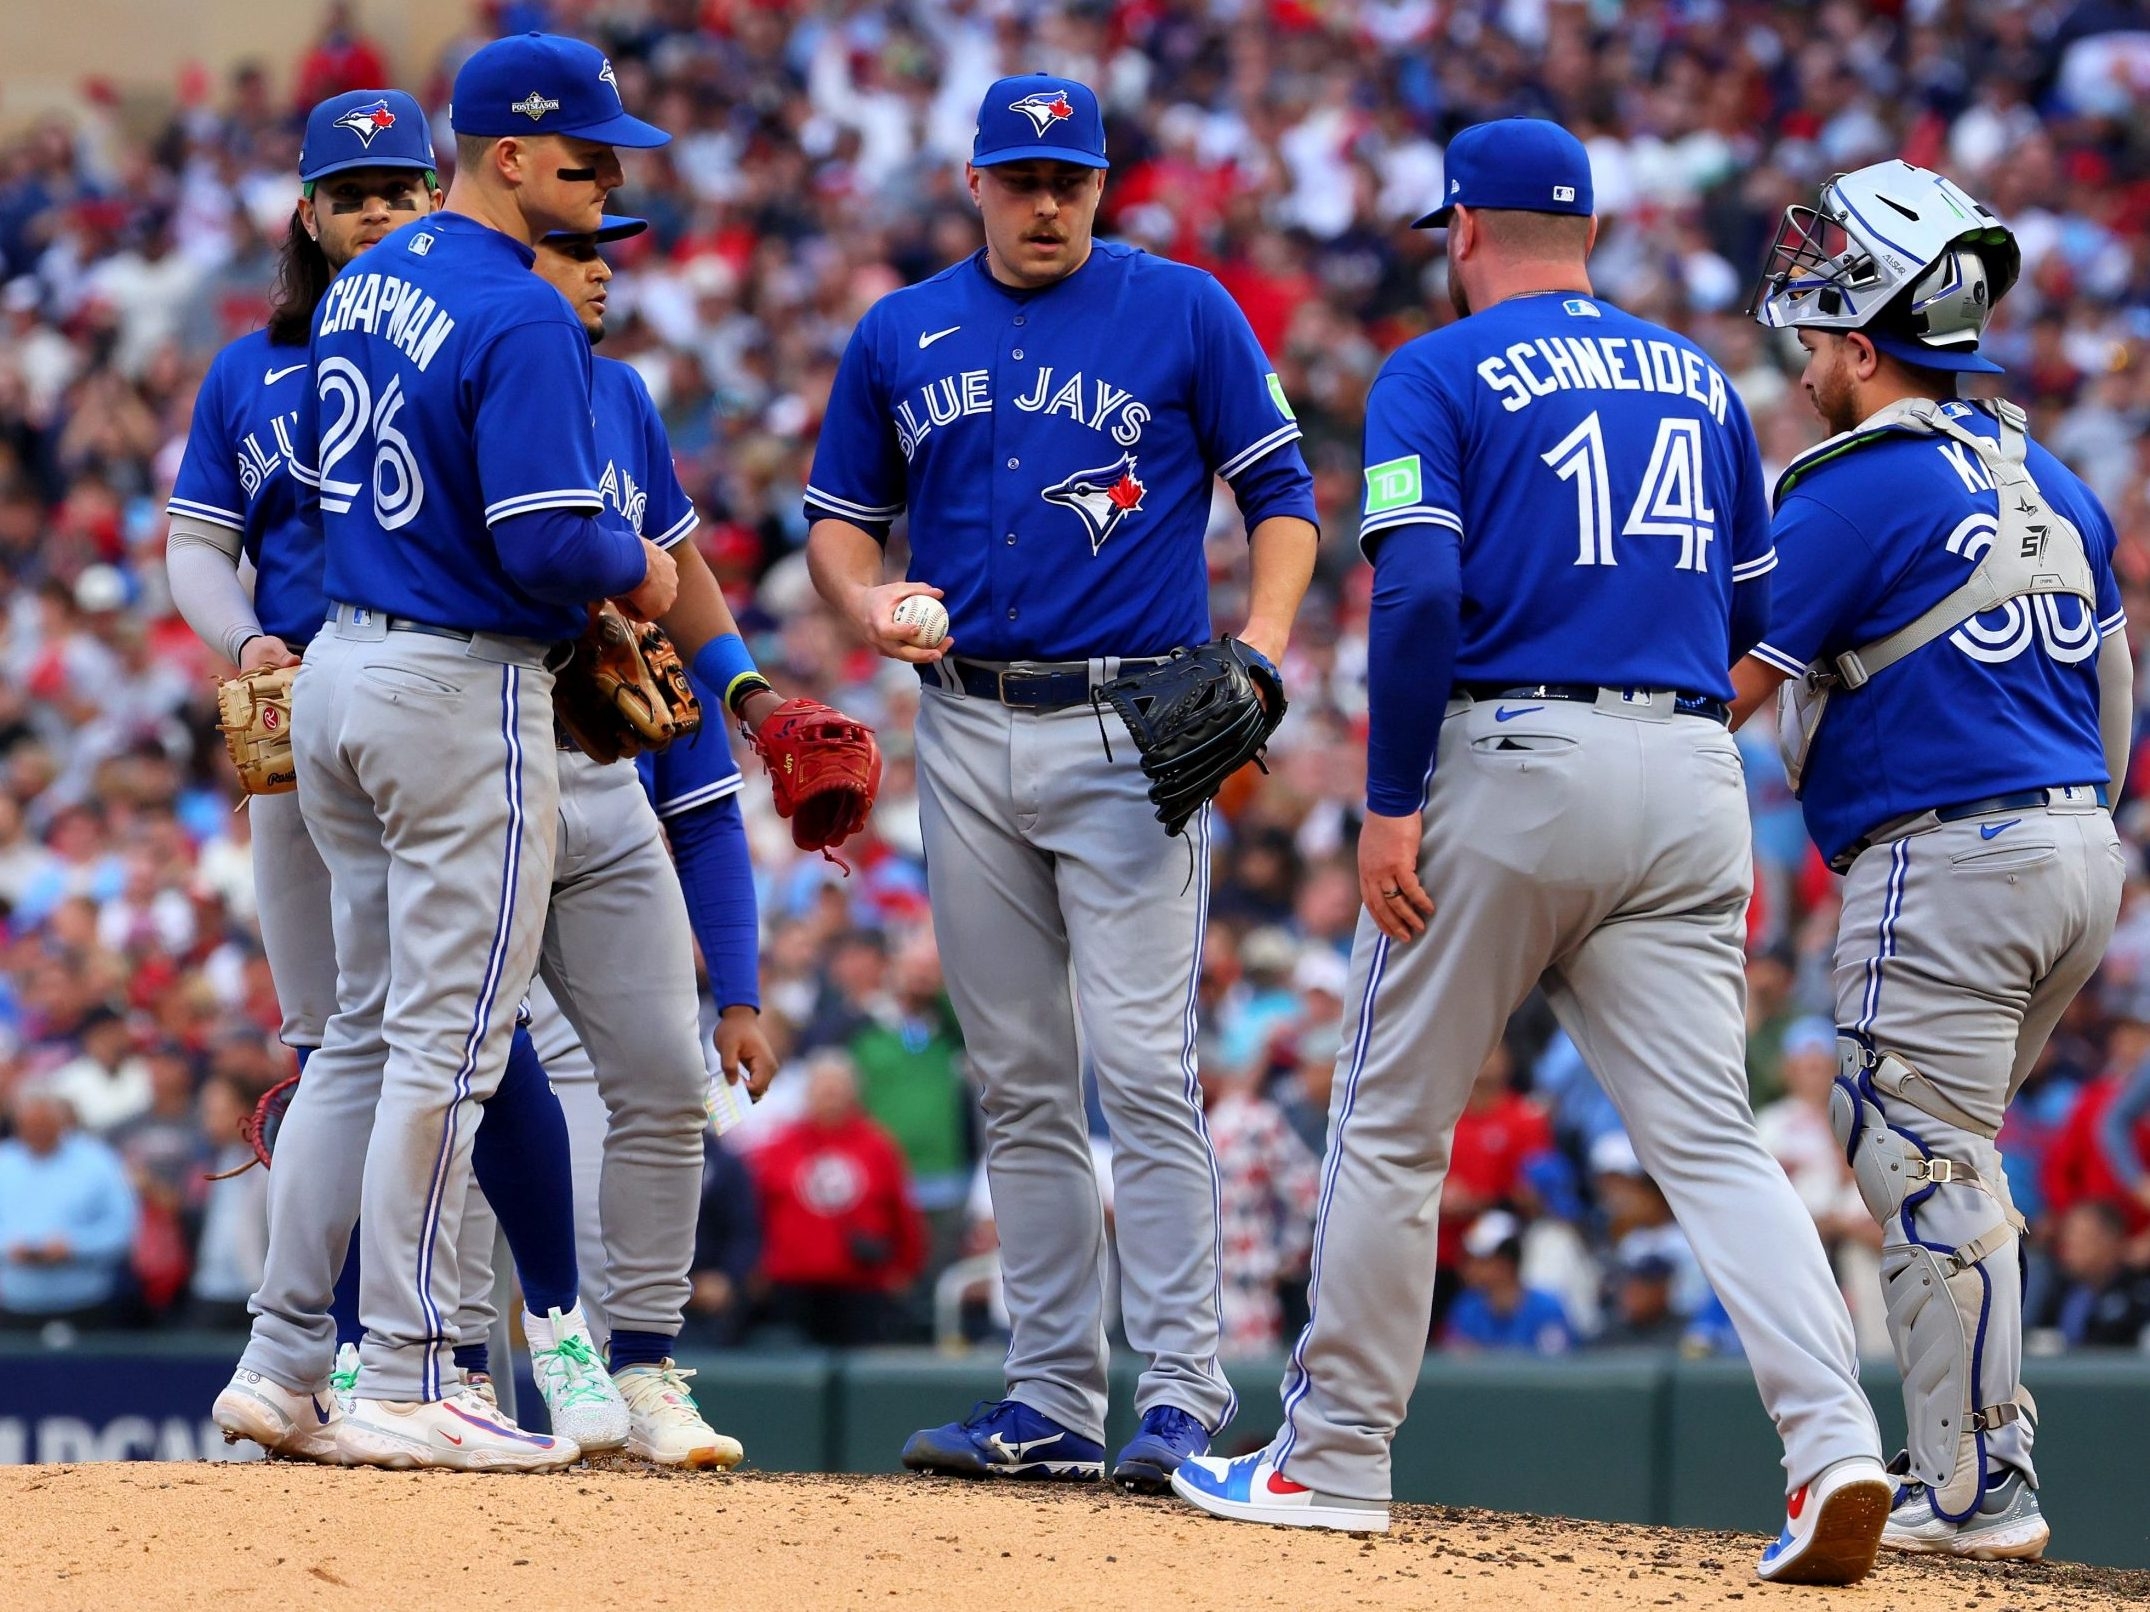 Blue Jays reinforcing excitement despite what's going wrong